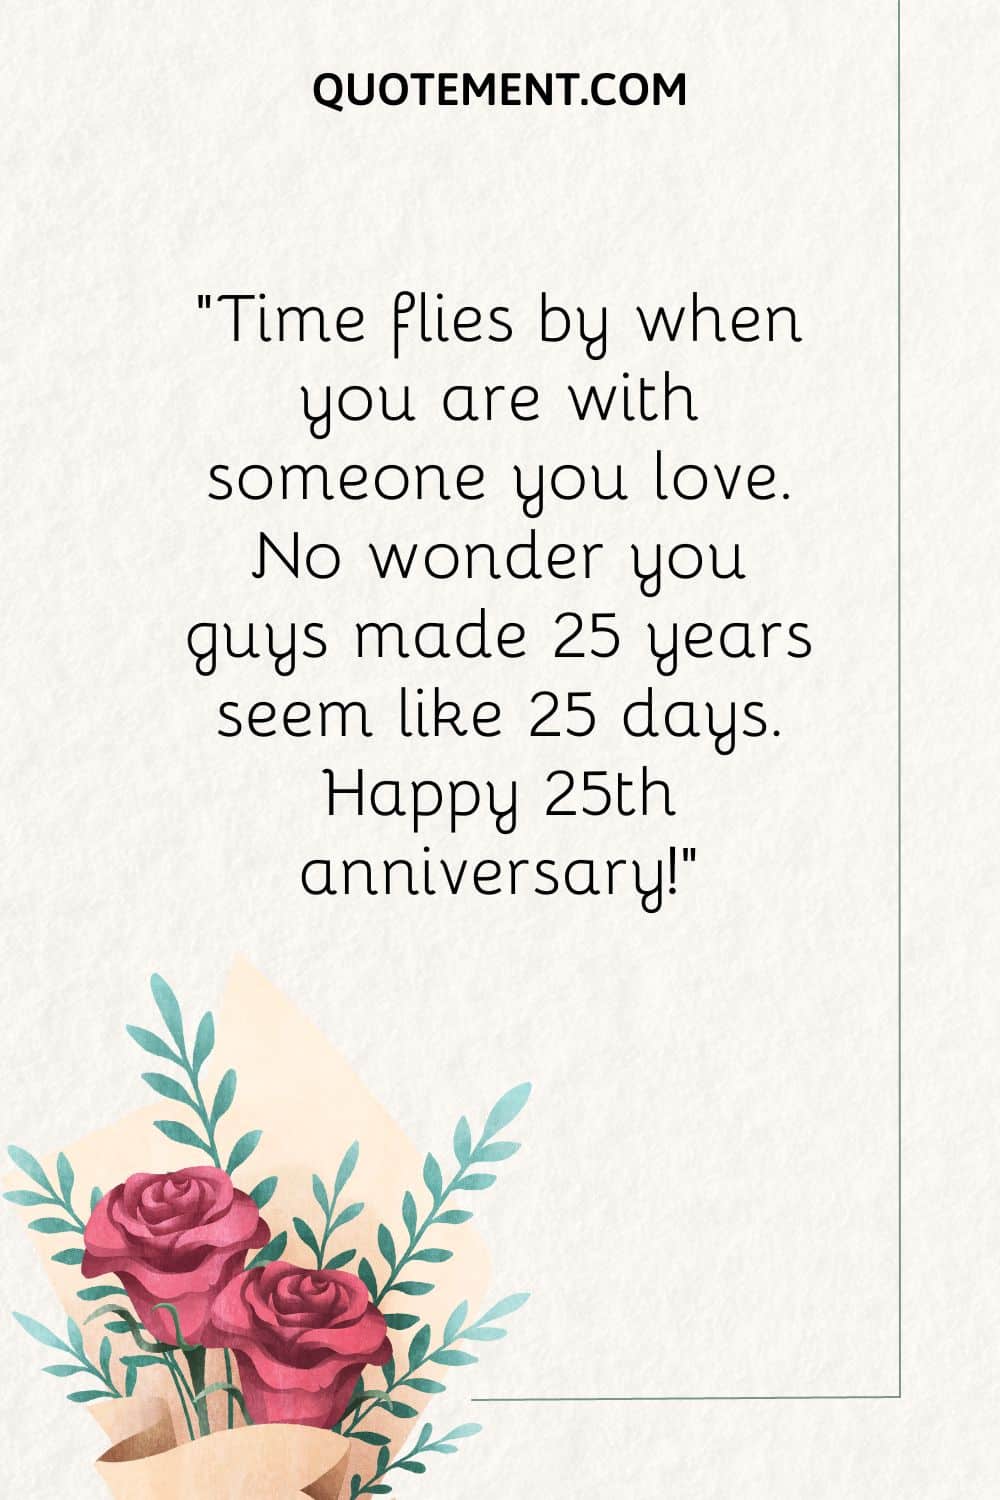 Time flies by when you are with someone you love